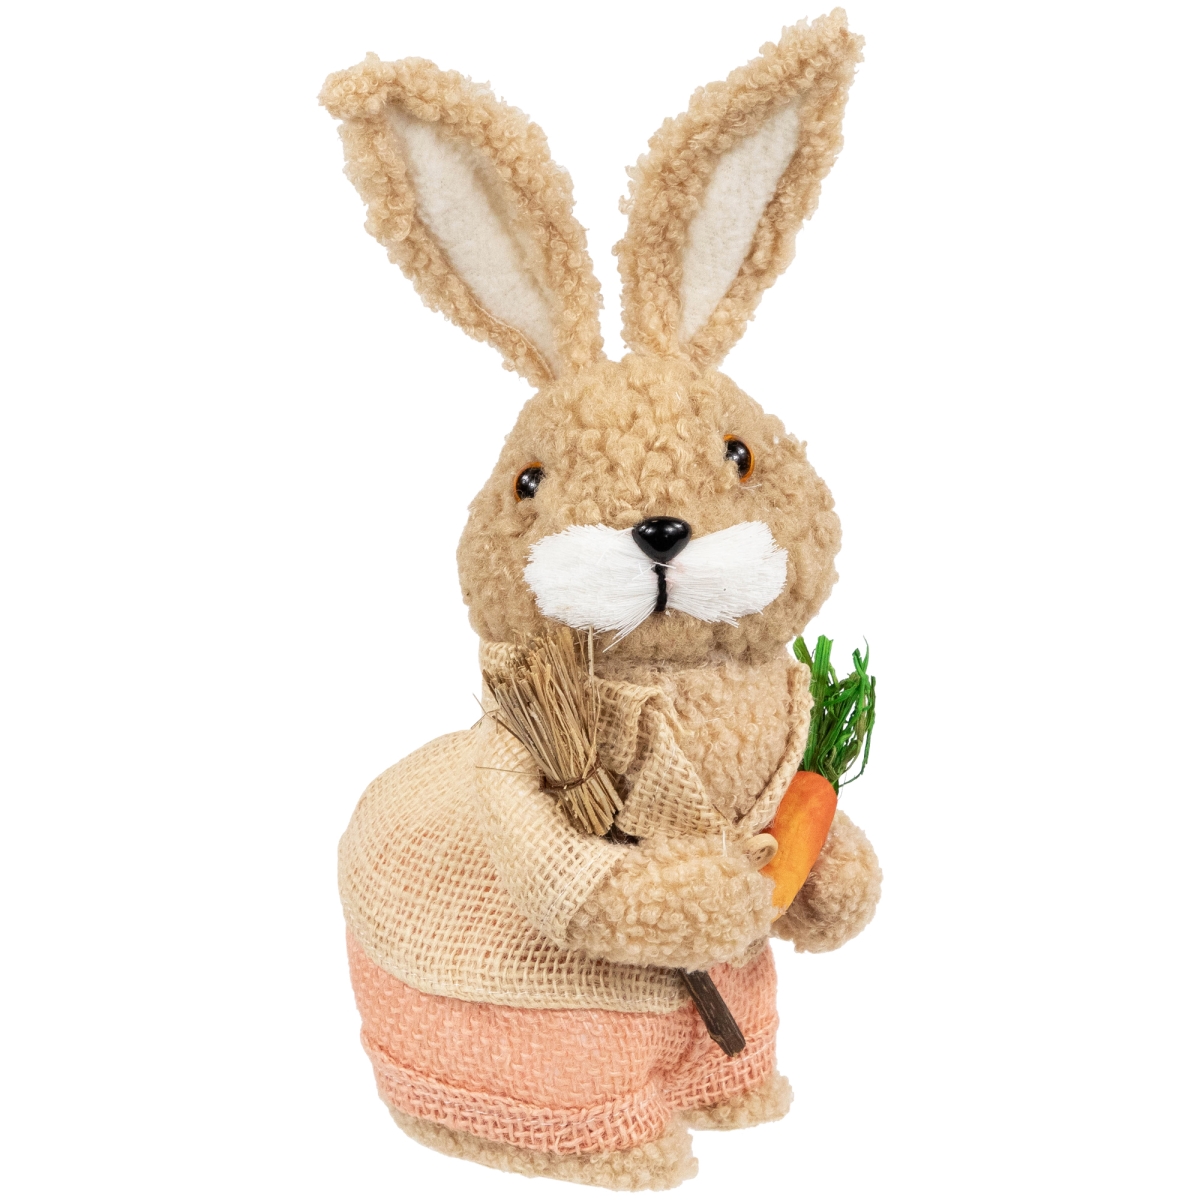 Picture of Northlight 35737340 10 x 4 x 5 in. Plush Boy Easter Rabbit Figurine with Carrots